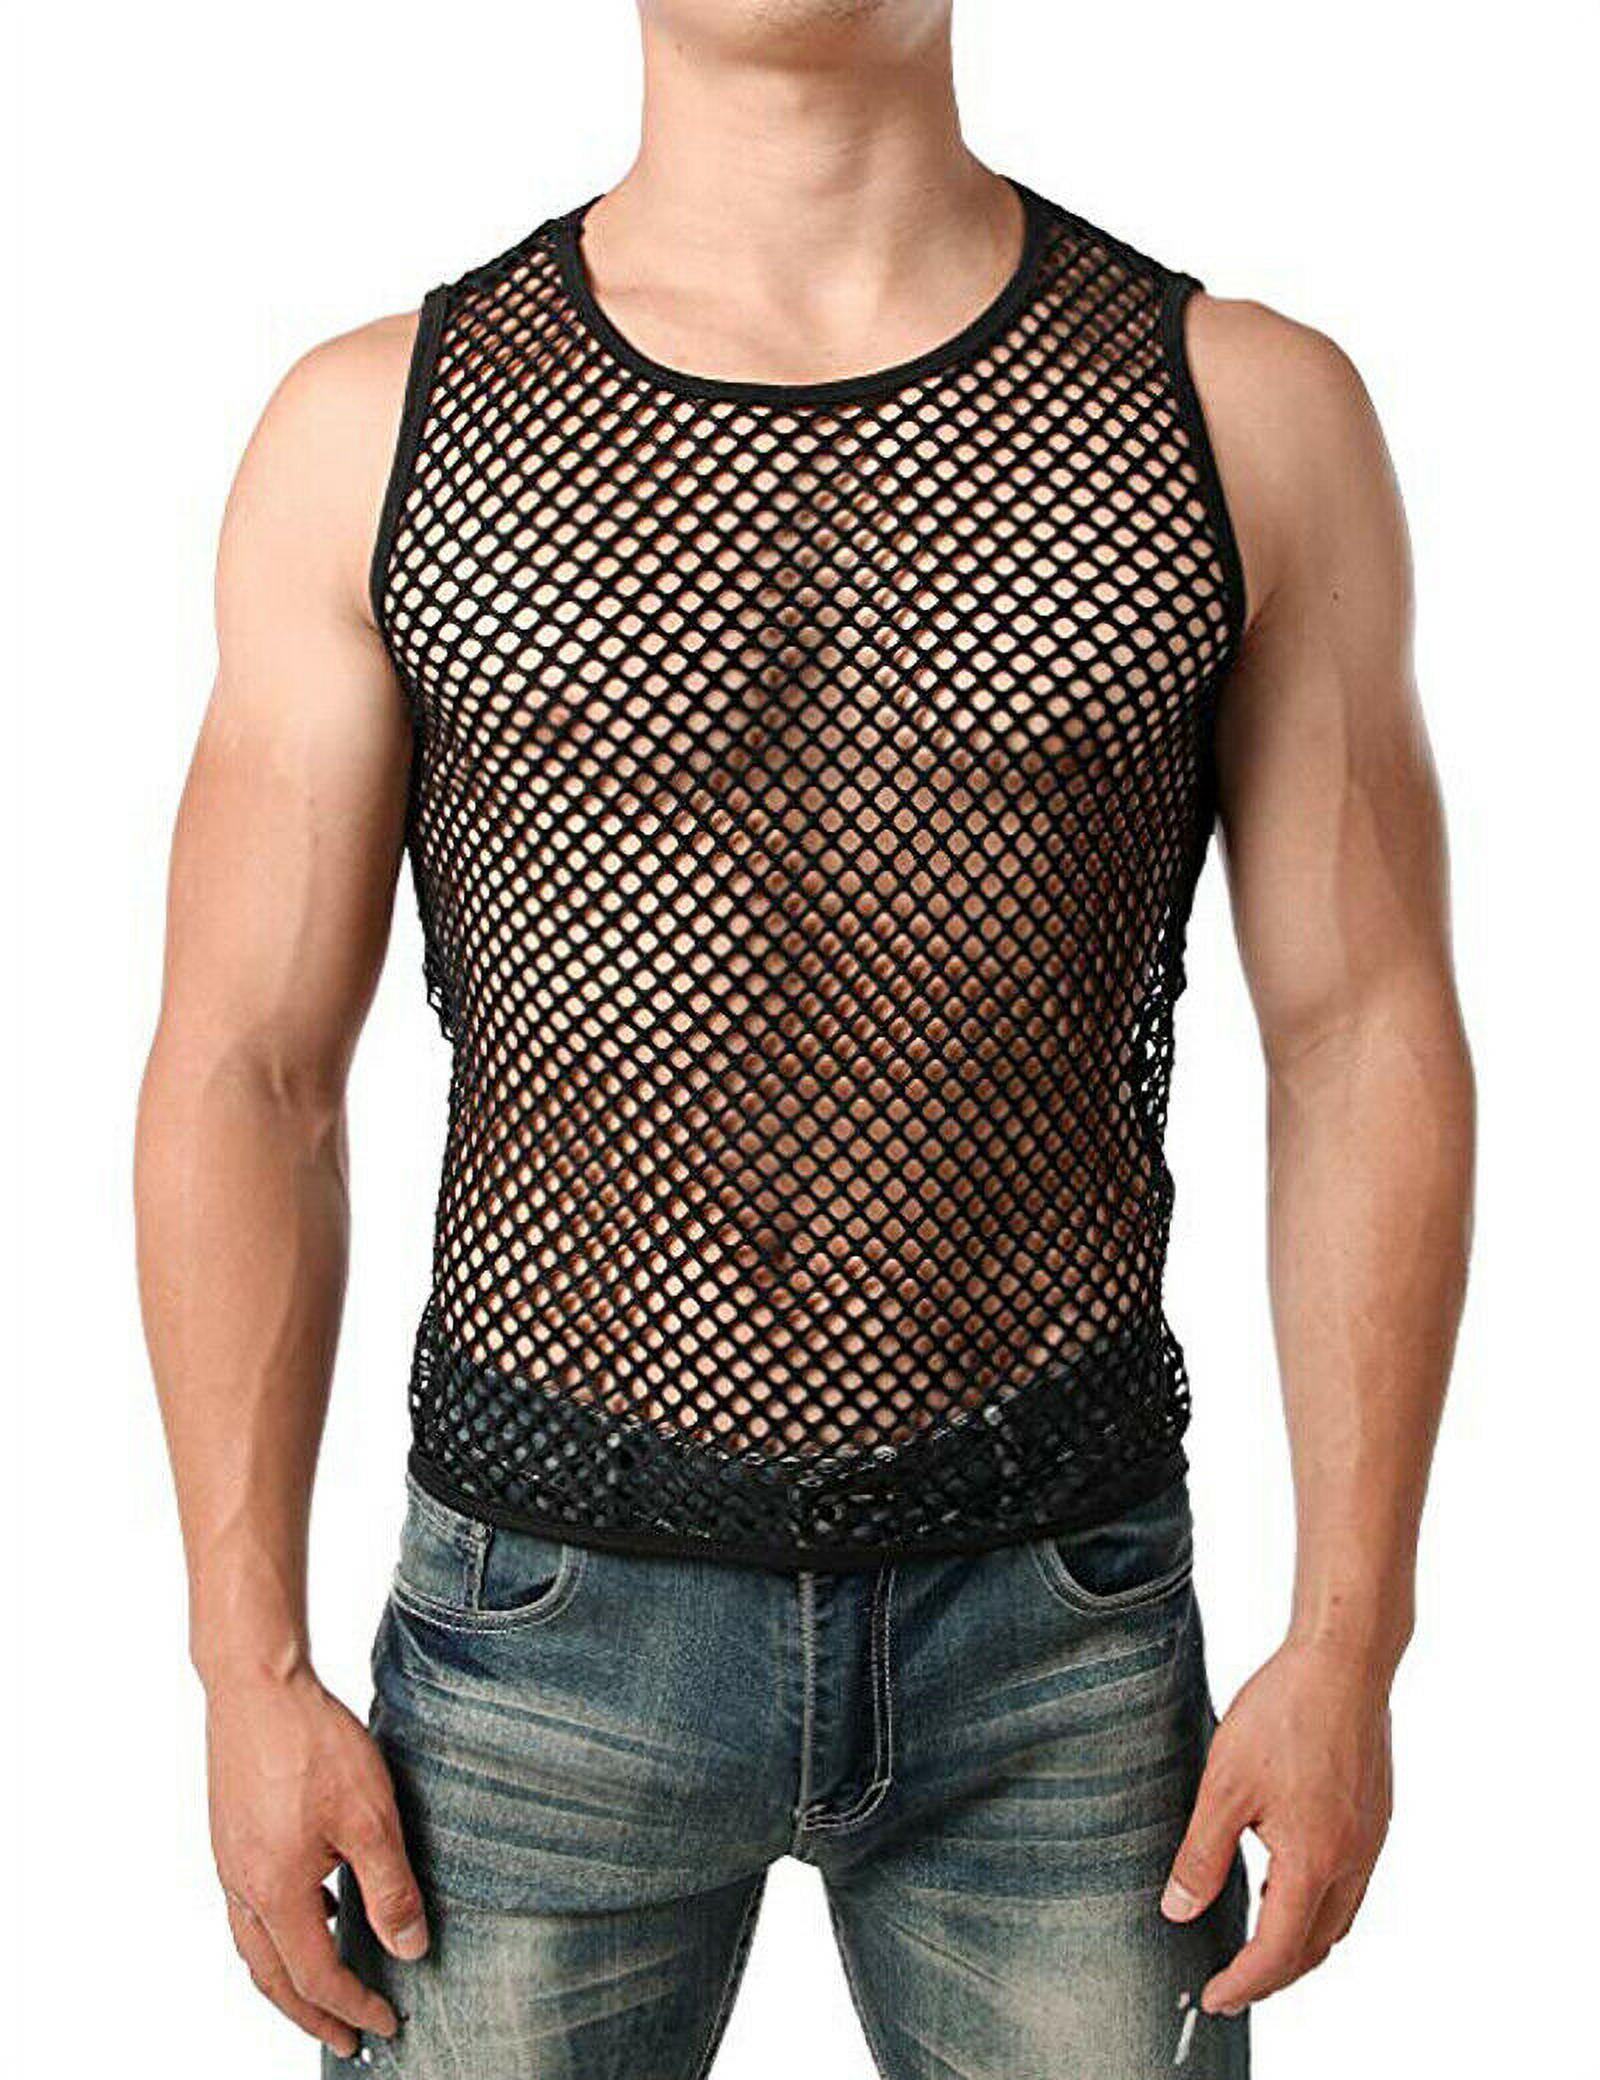 Men Mesh Tank Top See Through Fishnet Vest Sleeveless Fitted Muscle  T-Shirts Tops